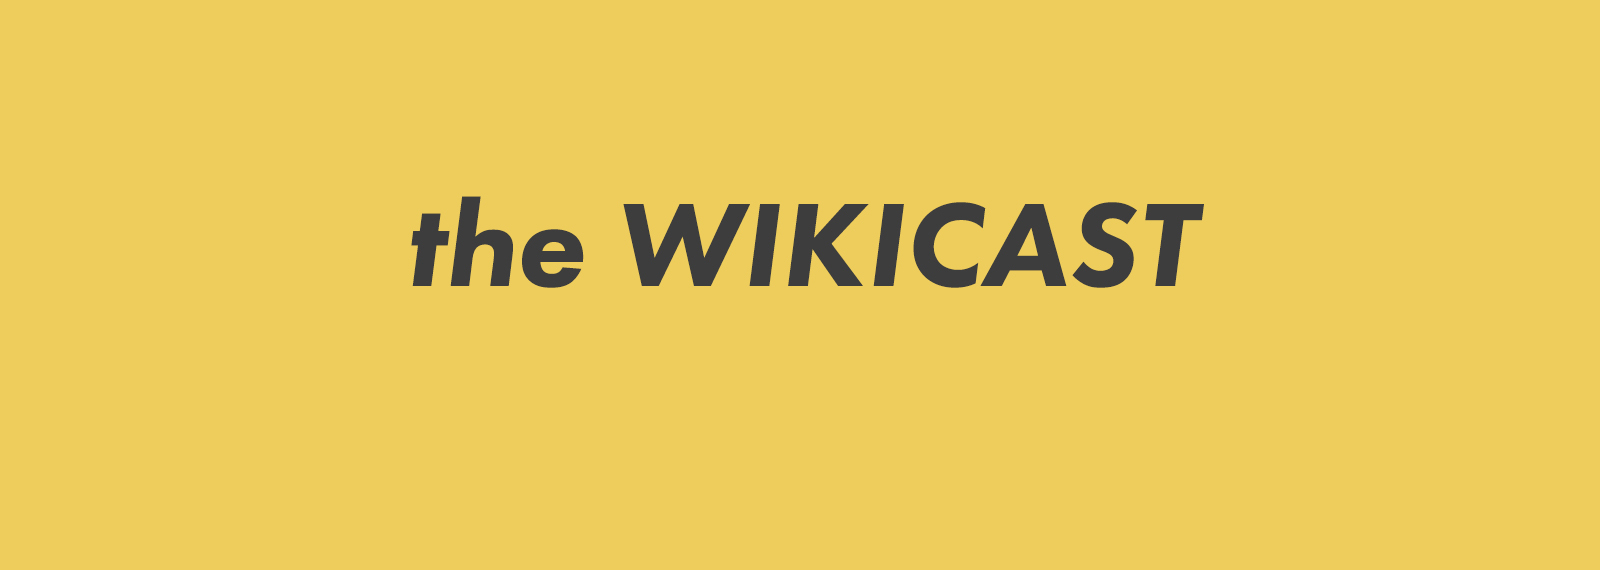 The Wikicast